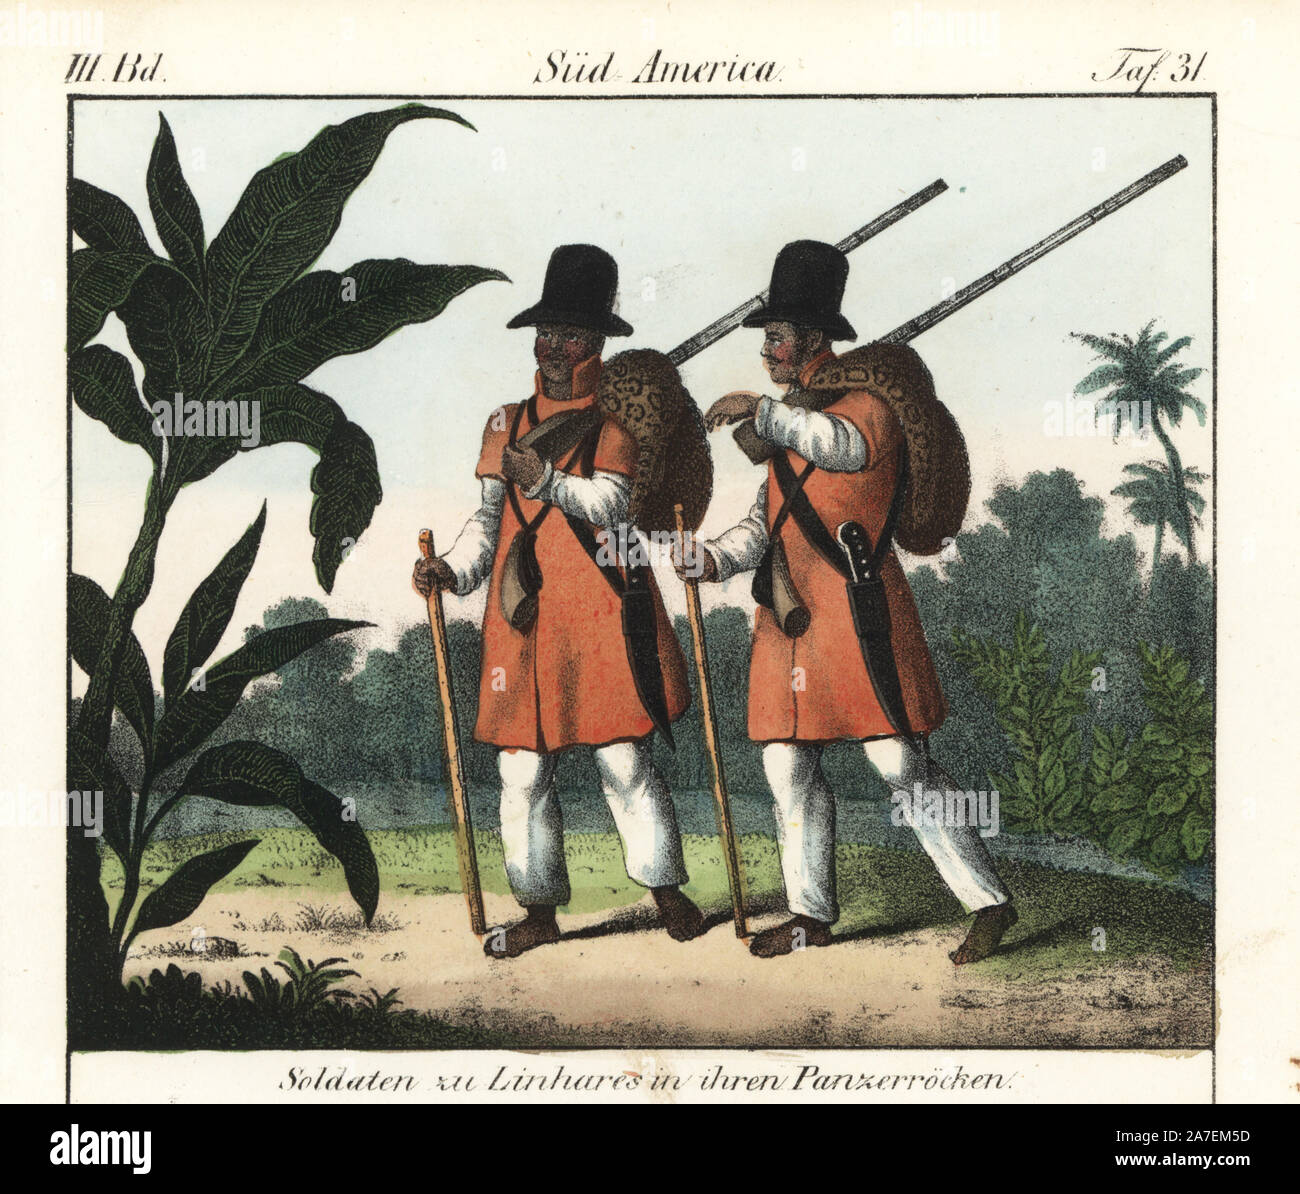 Soldiers of Linhares, Brazil, in uniform: trousers, coat, hat and ocelot skin, with musket, powder horn, knife and stick. Handcoloured lithograph from Friedrich Wilhelm Goedsche's 'Vollstaendige Völkergallerie in getreuen Abbildungen' (Complete Gallery of Peoples in True Pictures), Meissen, circa 1835-1840. Goedsche (1785-1863) was a German writer, bookseller and publisher in Meissen. Illustration adapted from Maximilian von Wied-Neuwied's 'Travels in Brazil, 1815-1817.' Stock Photo